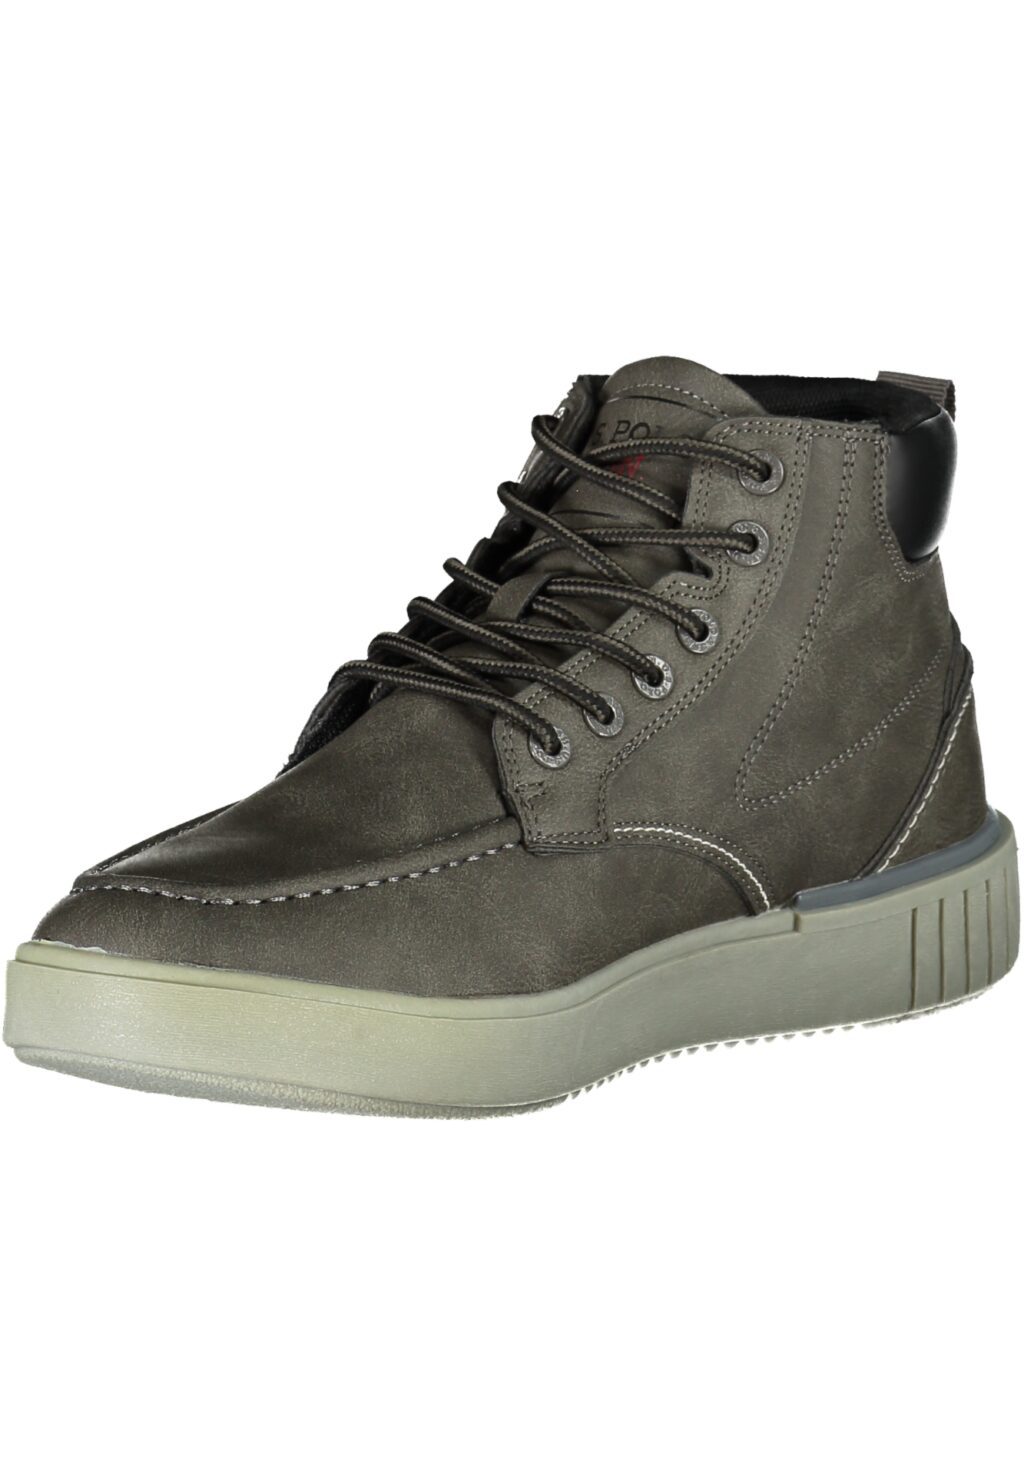 US POLO BEST PRICE GRAY MEN'S FOOTWEAR BOOT PYRO002MCUY1_GRGRY007